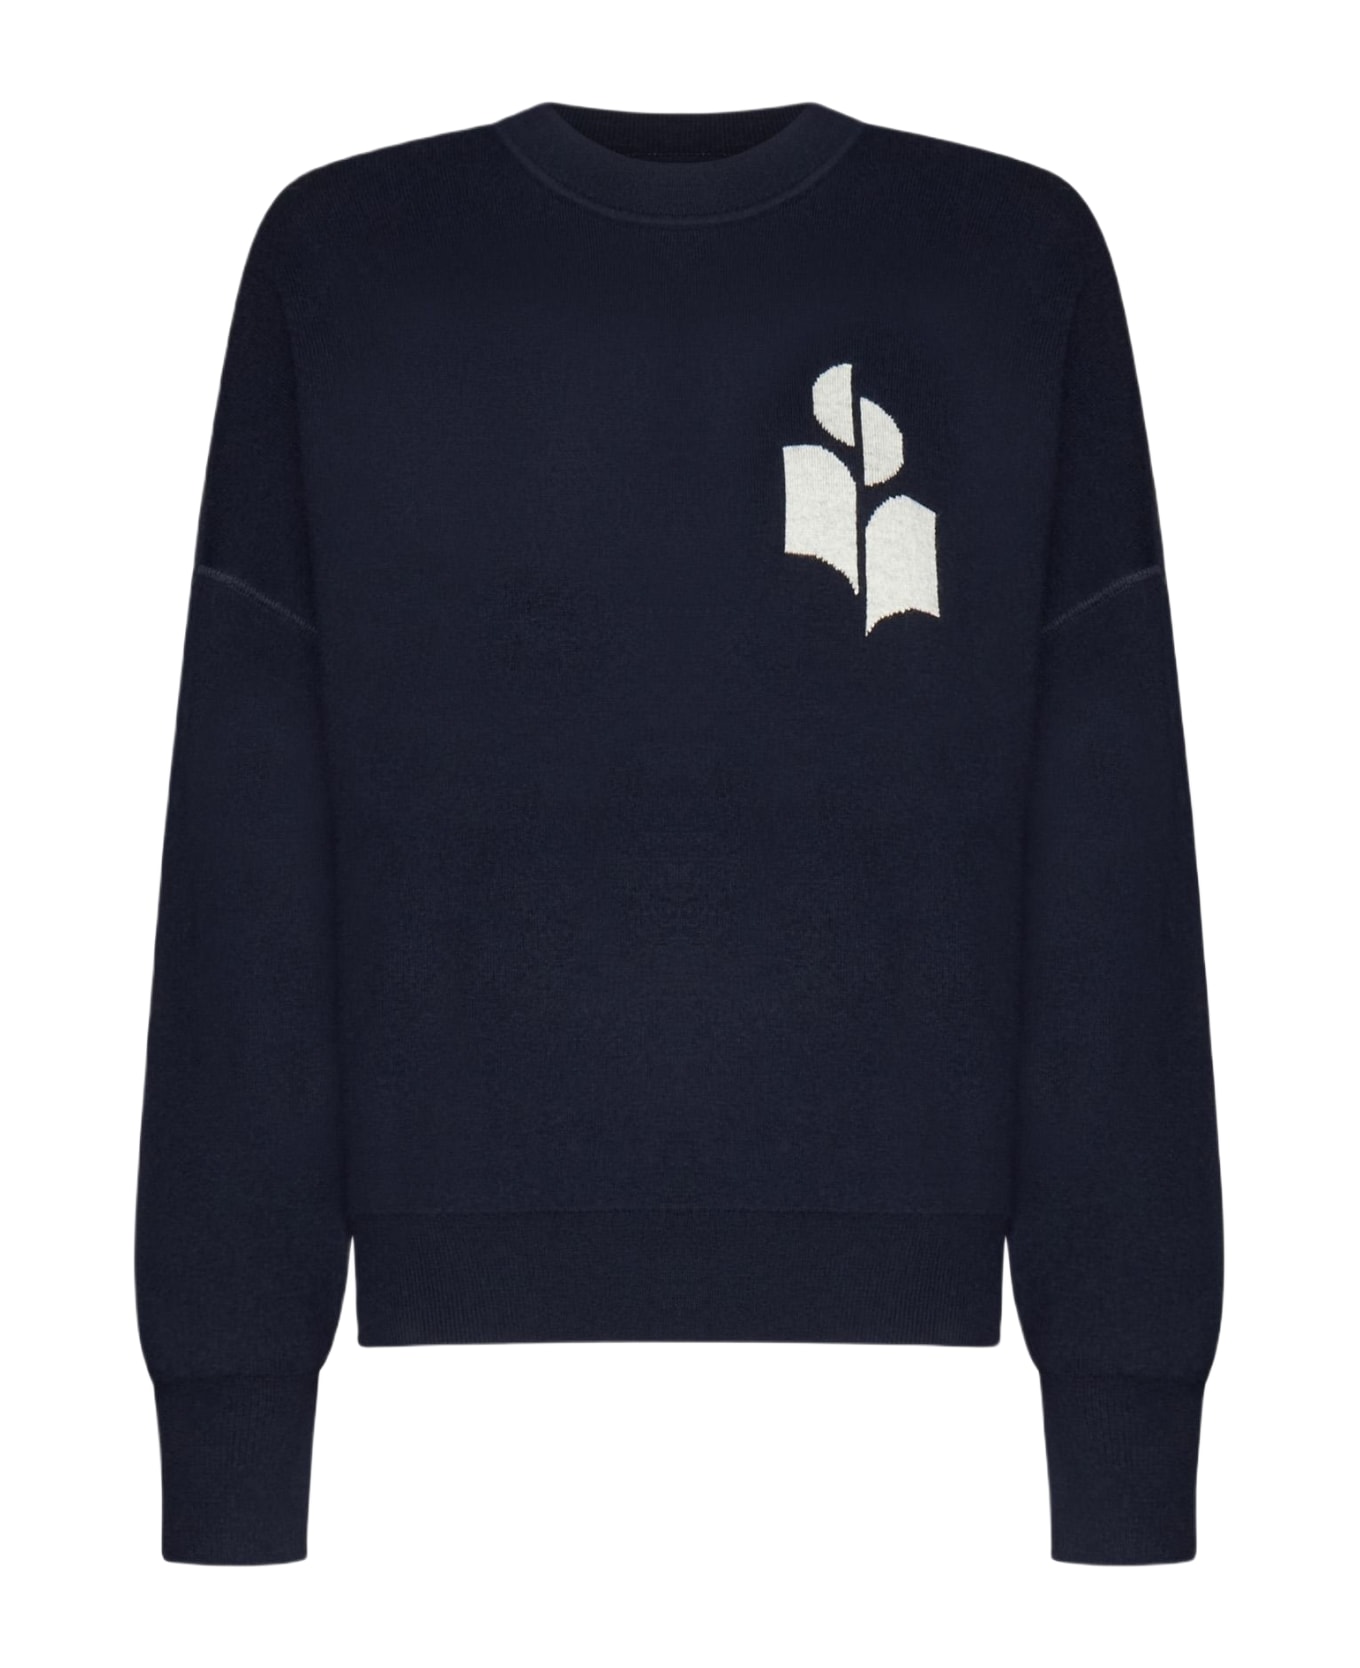 Marant Étoile Atlee Cotton And Wool Blend Sweater - Midnight